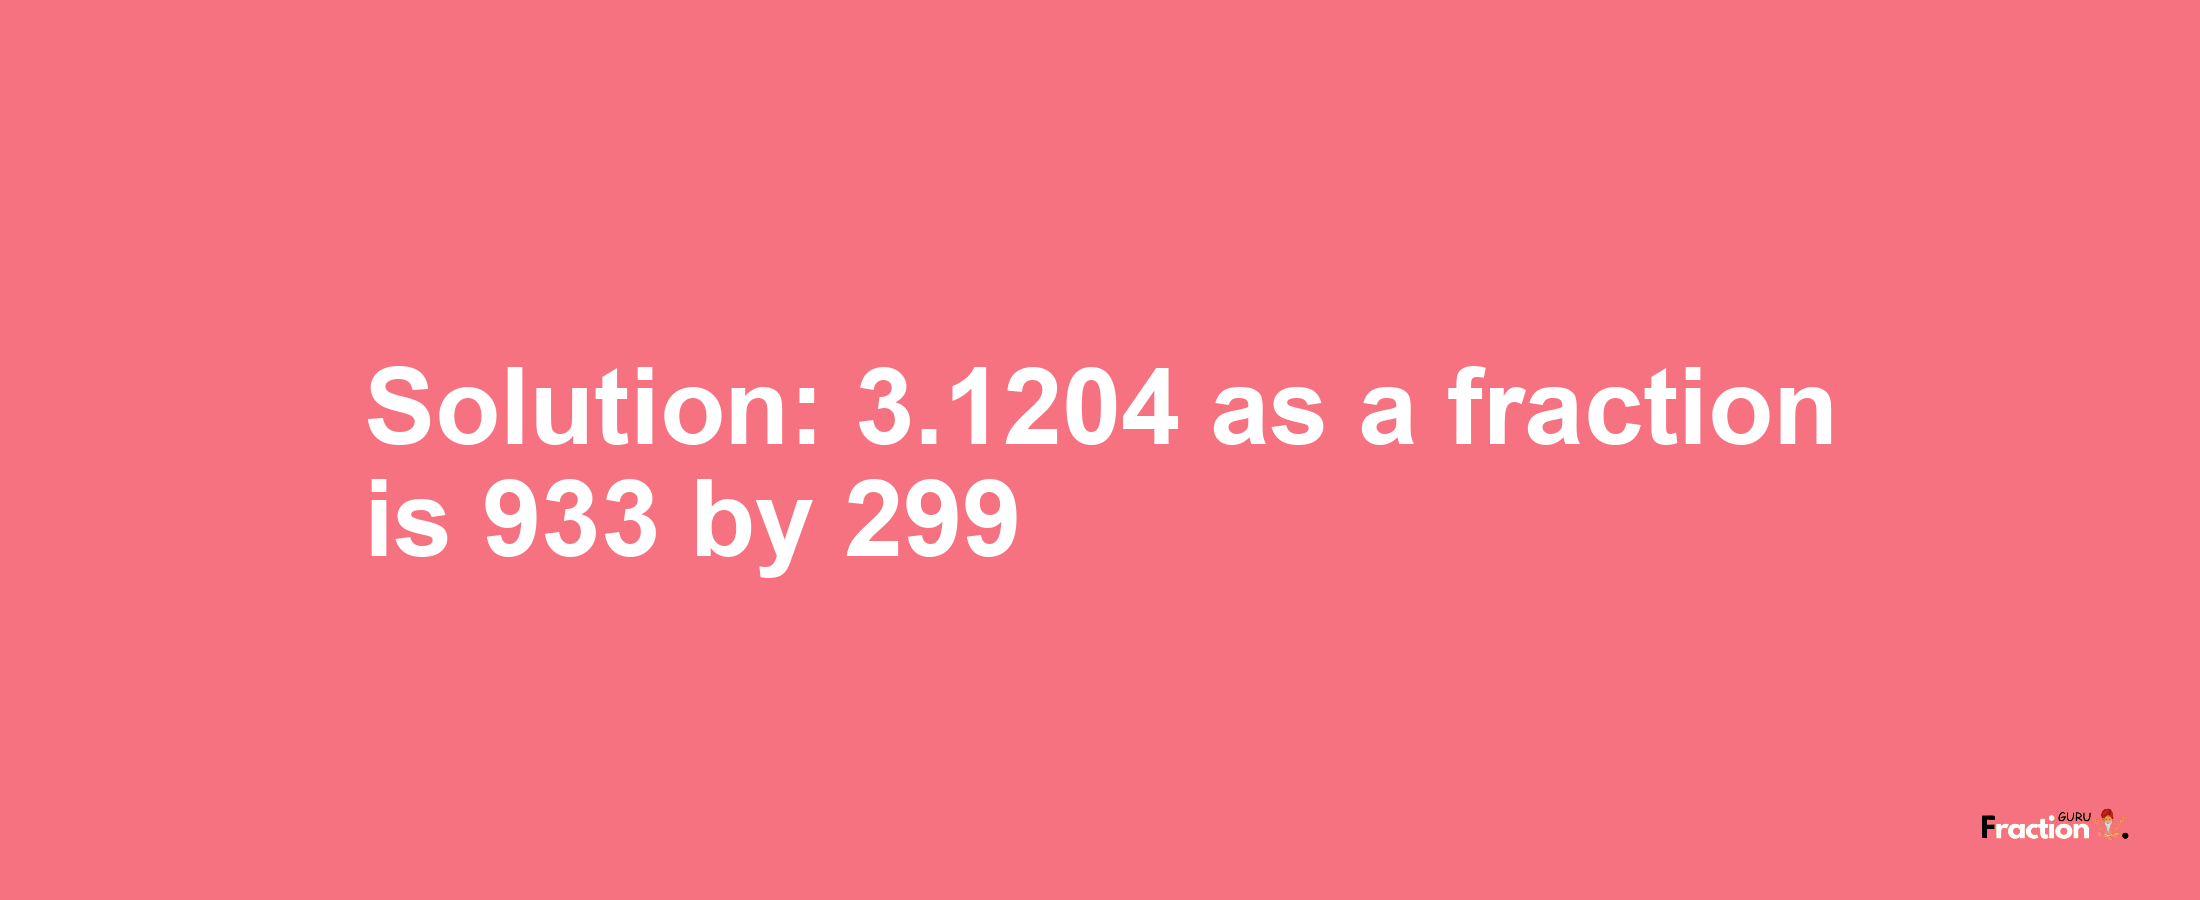 Solution:3.1204 as a fraction is 933/299